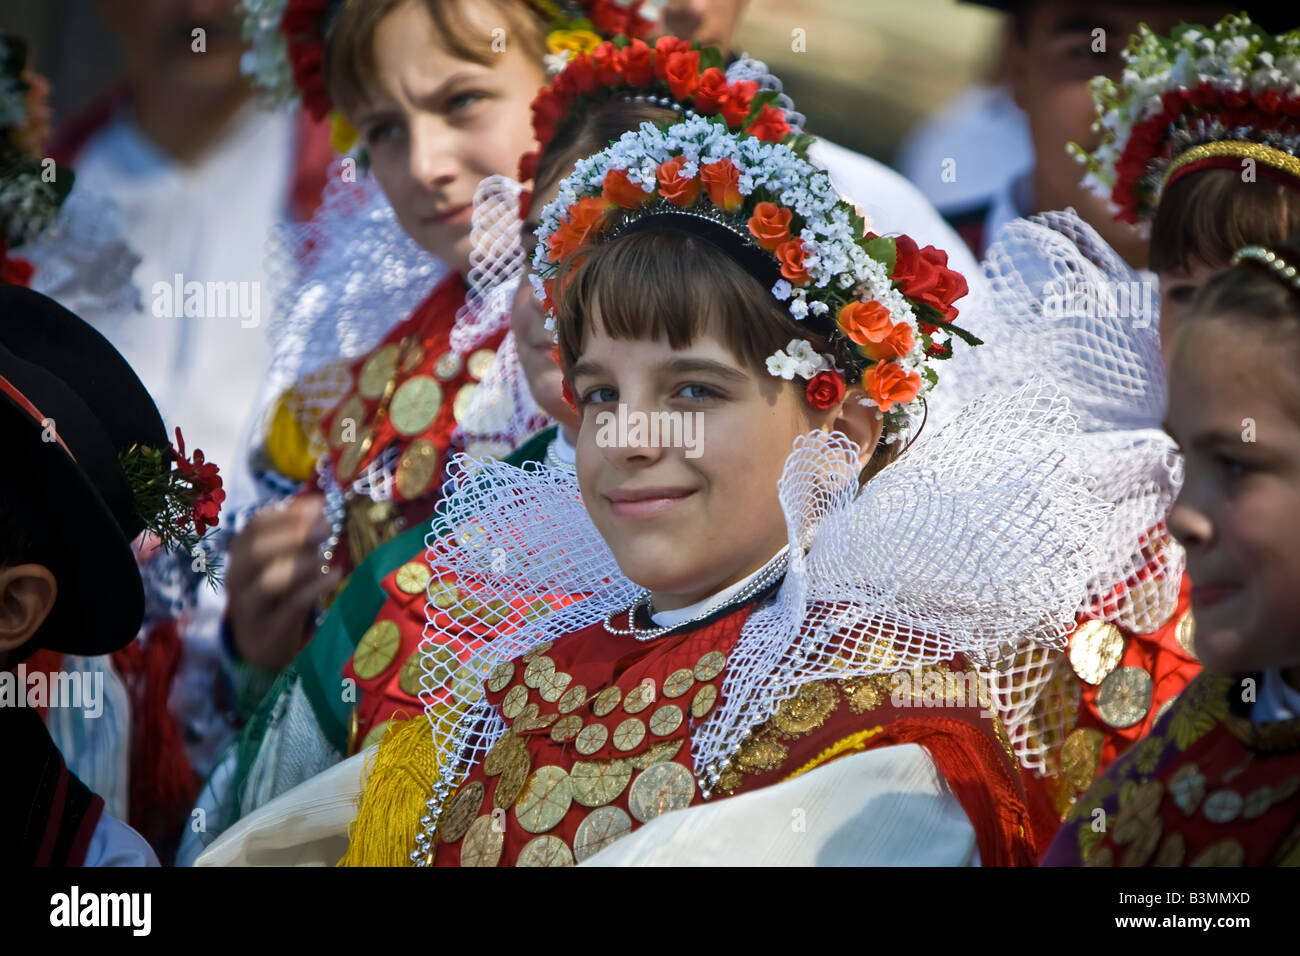 Young girl in the Croatian traditional dress with ducats on the dress and headdress on a folklore festival in Croatia. Stock Photo